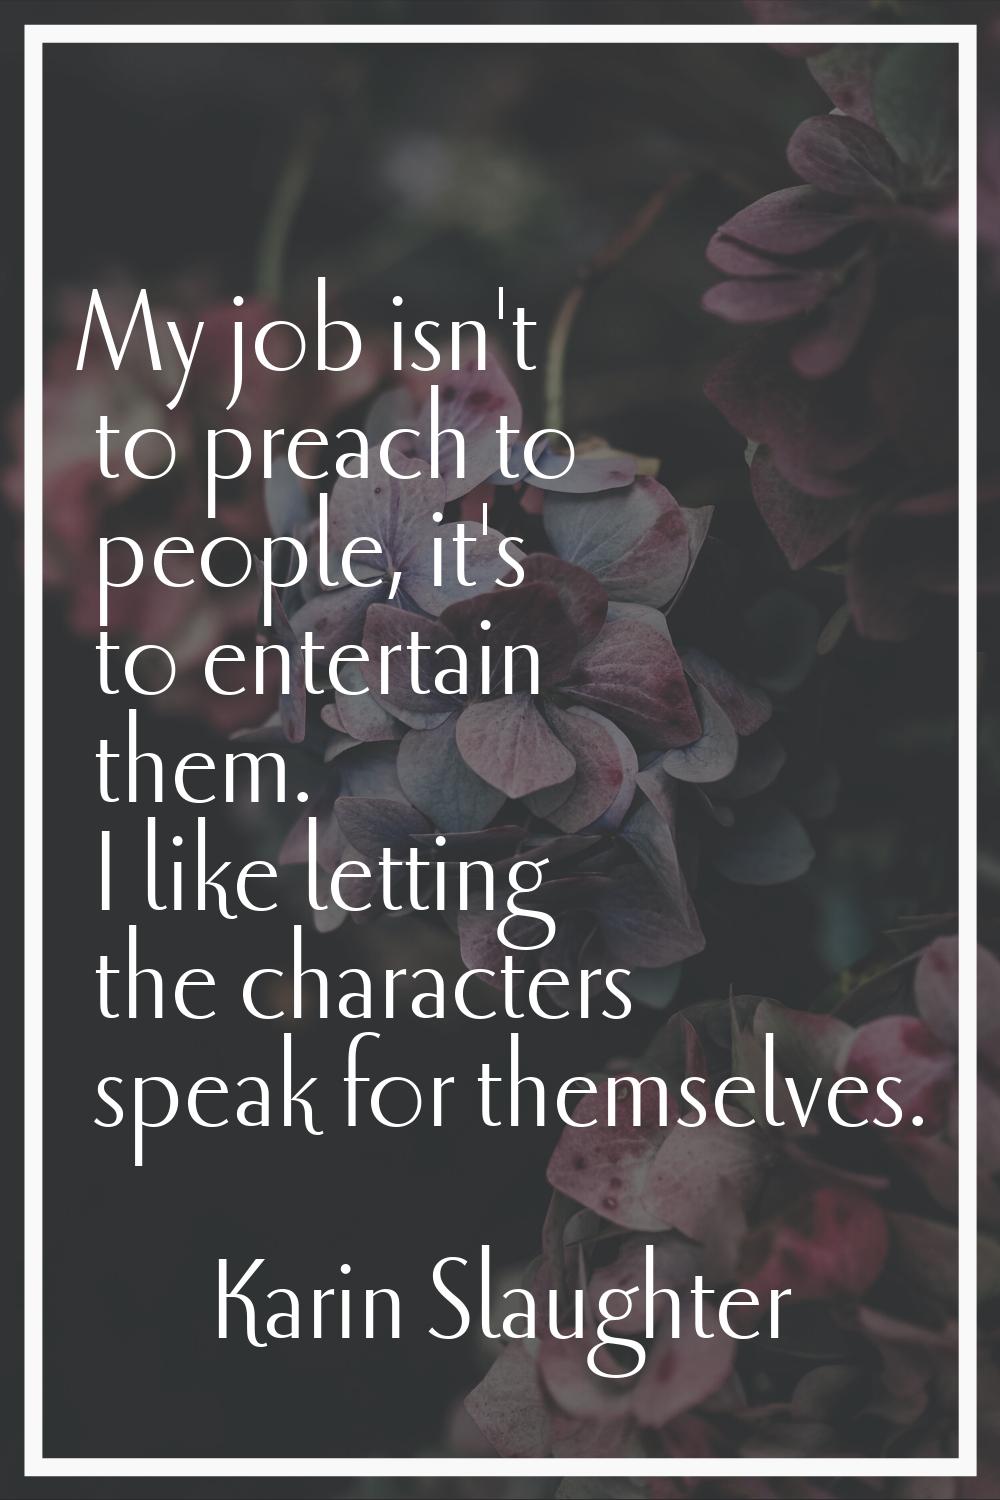 My job isn't to preach to people, it's to entertain them. I like letting the characters speak for t